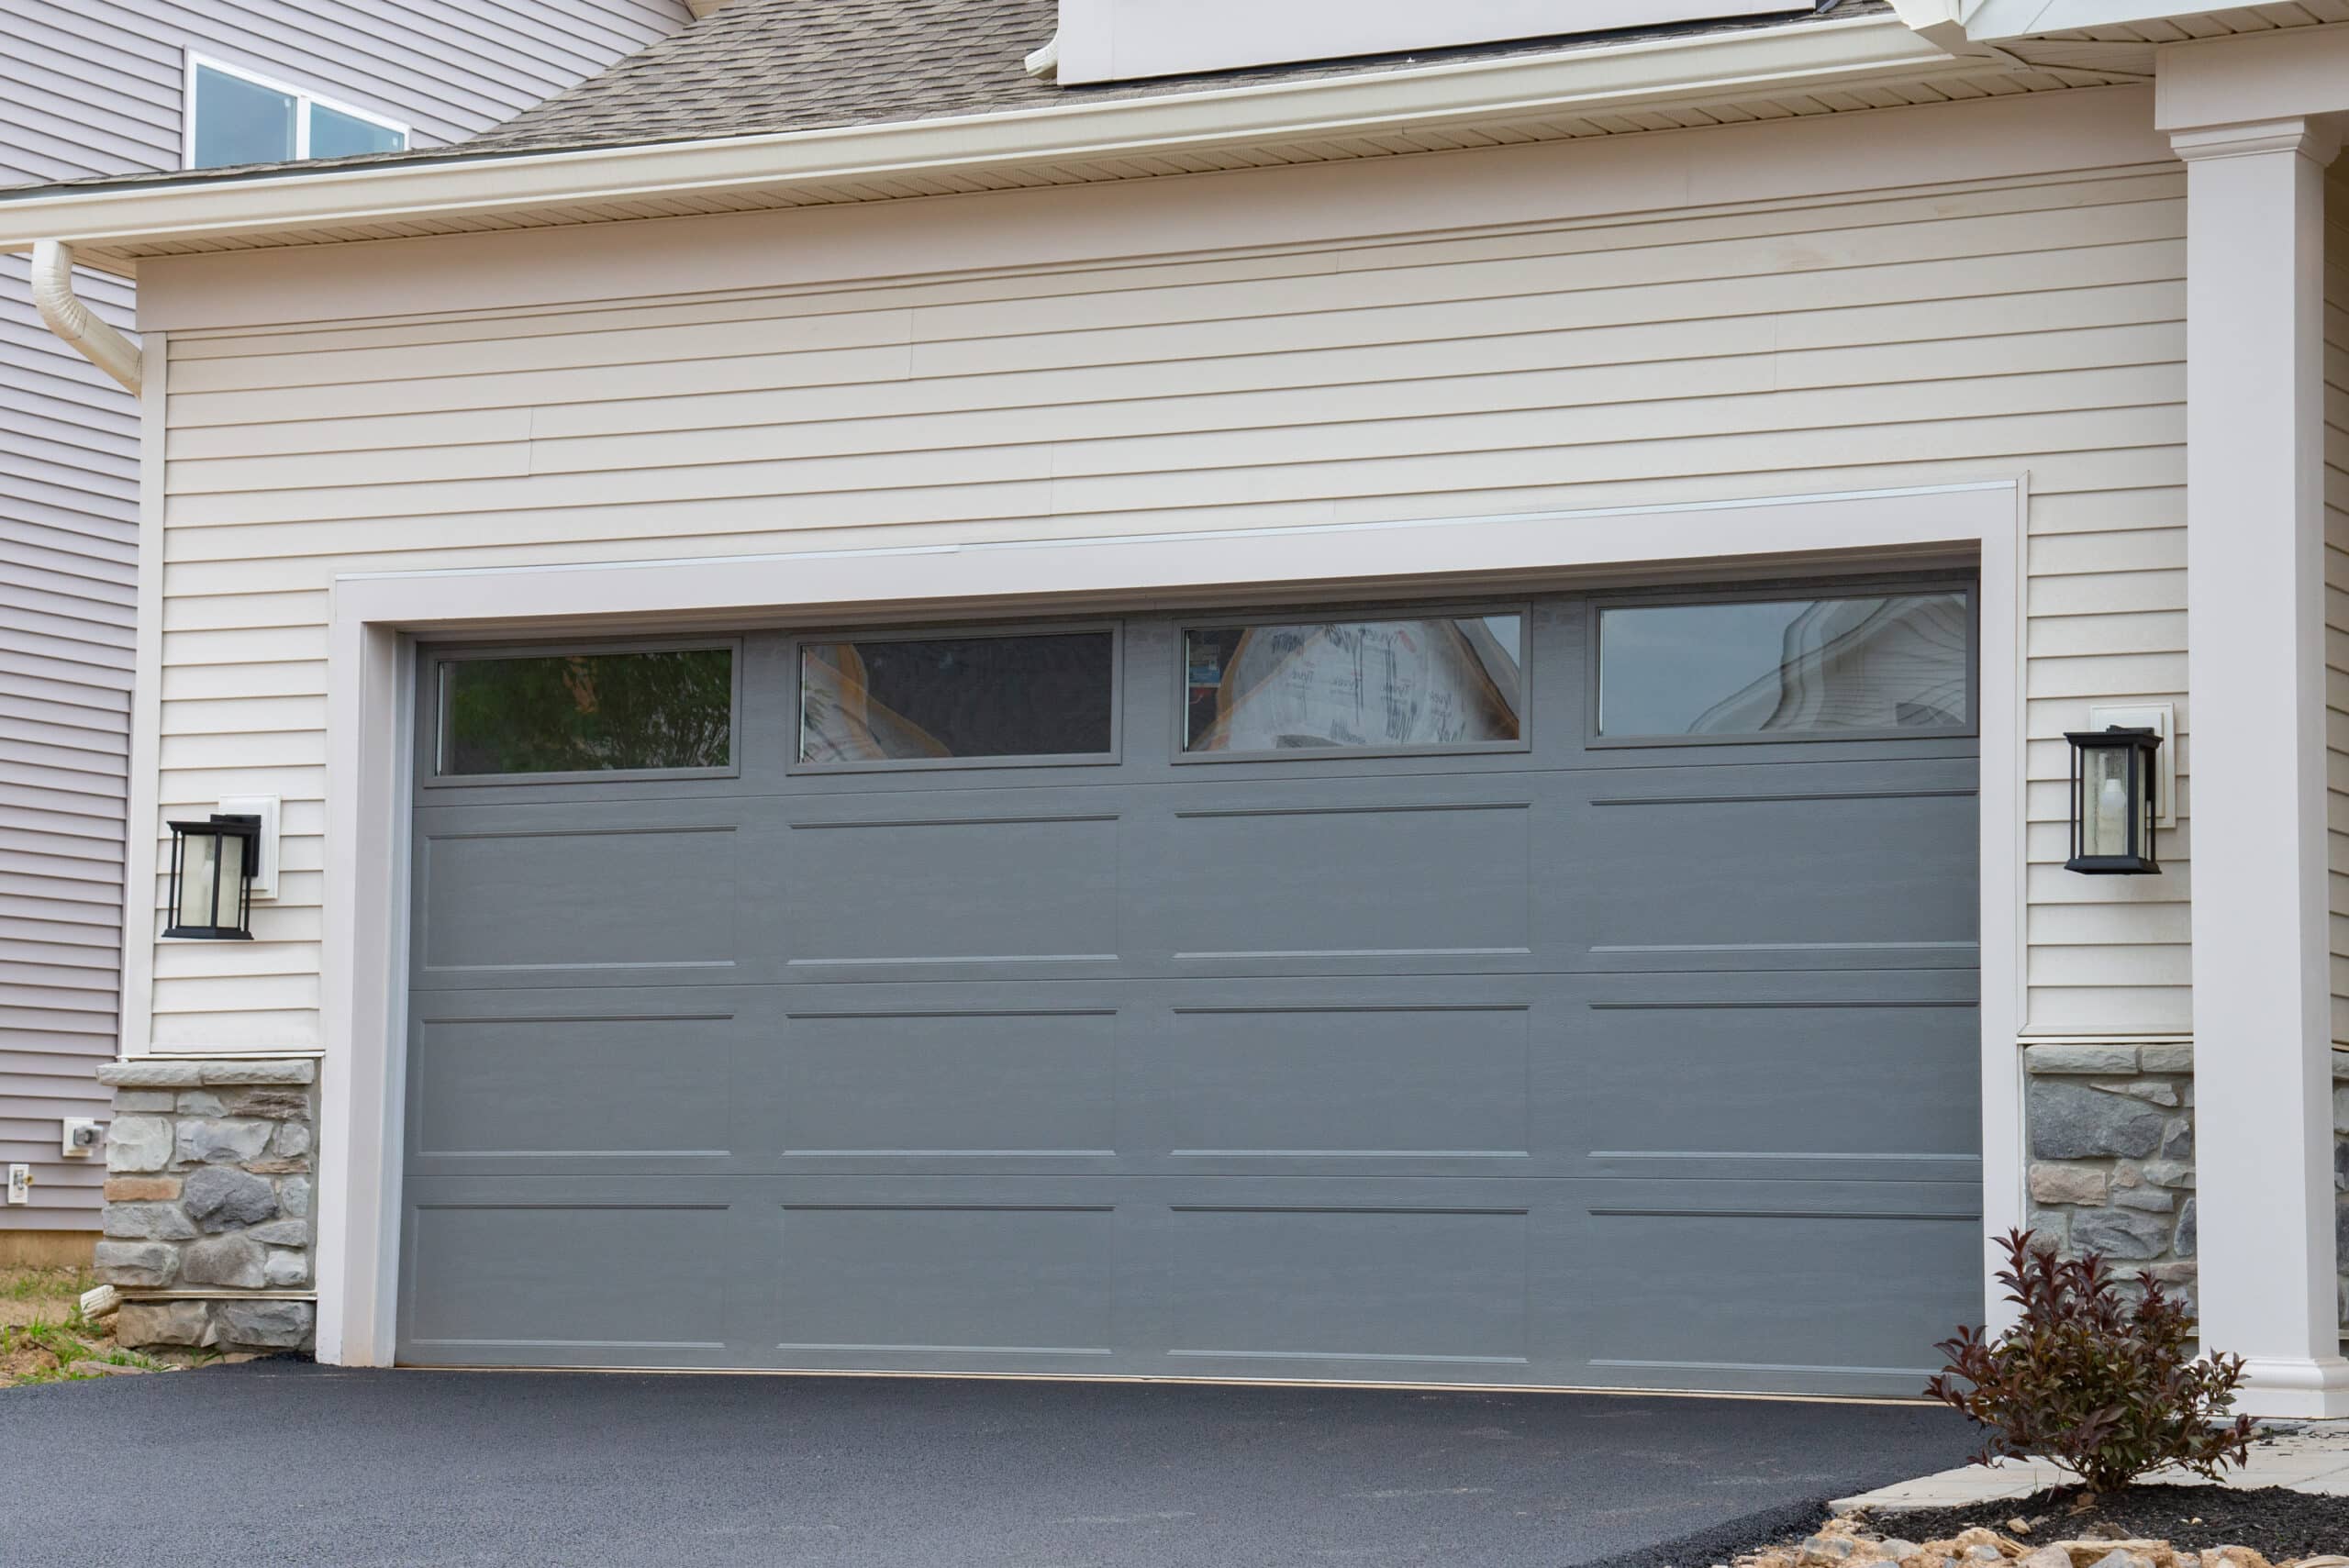 Garage Painting: How To, Benefits, And Trending Ideas